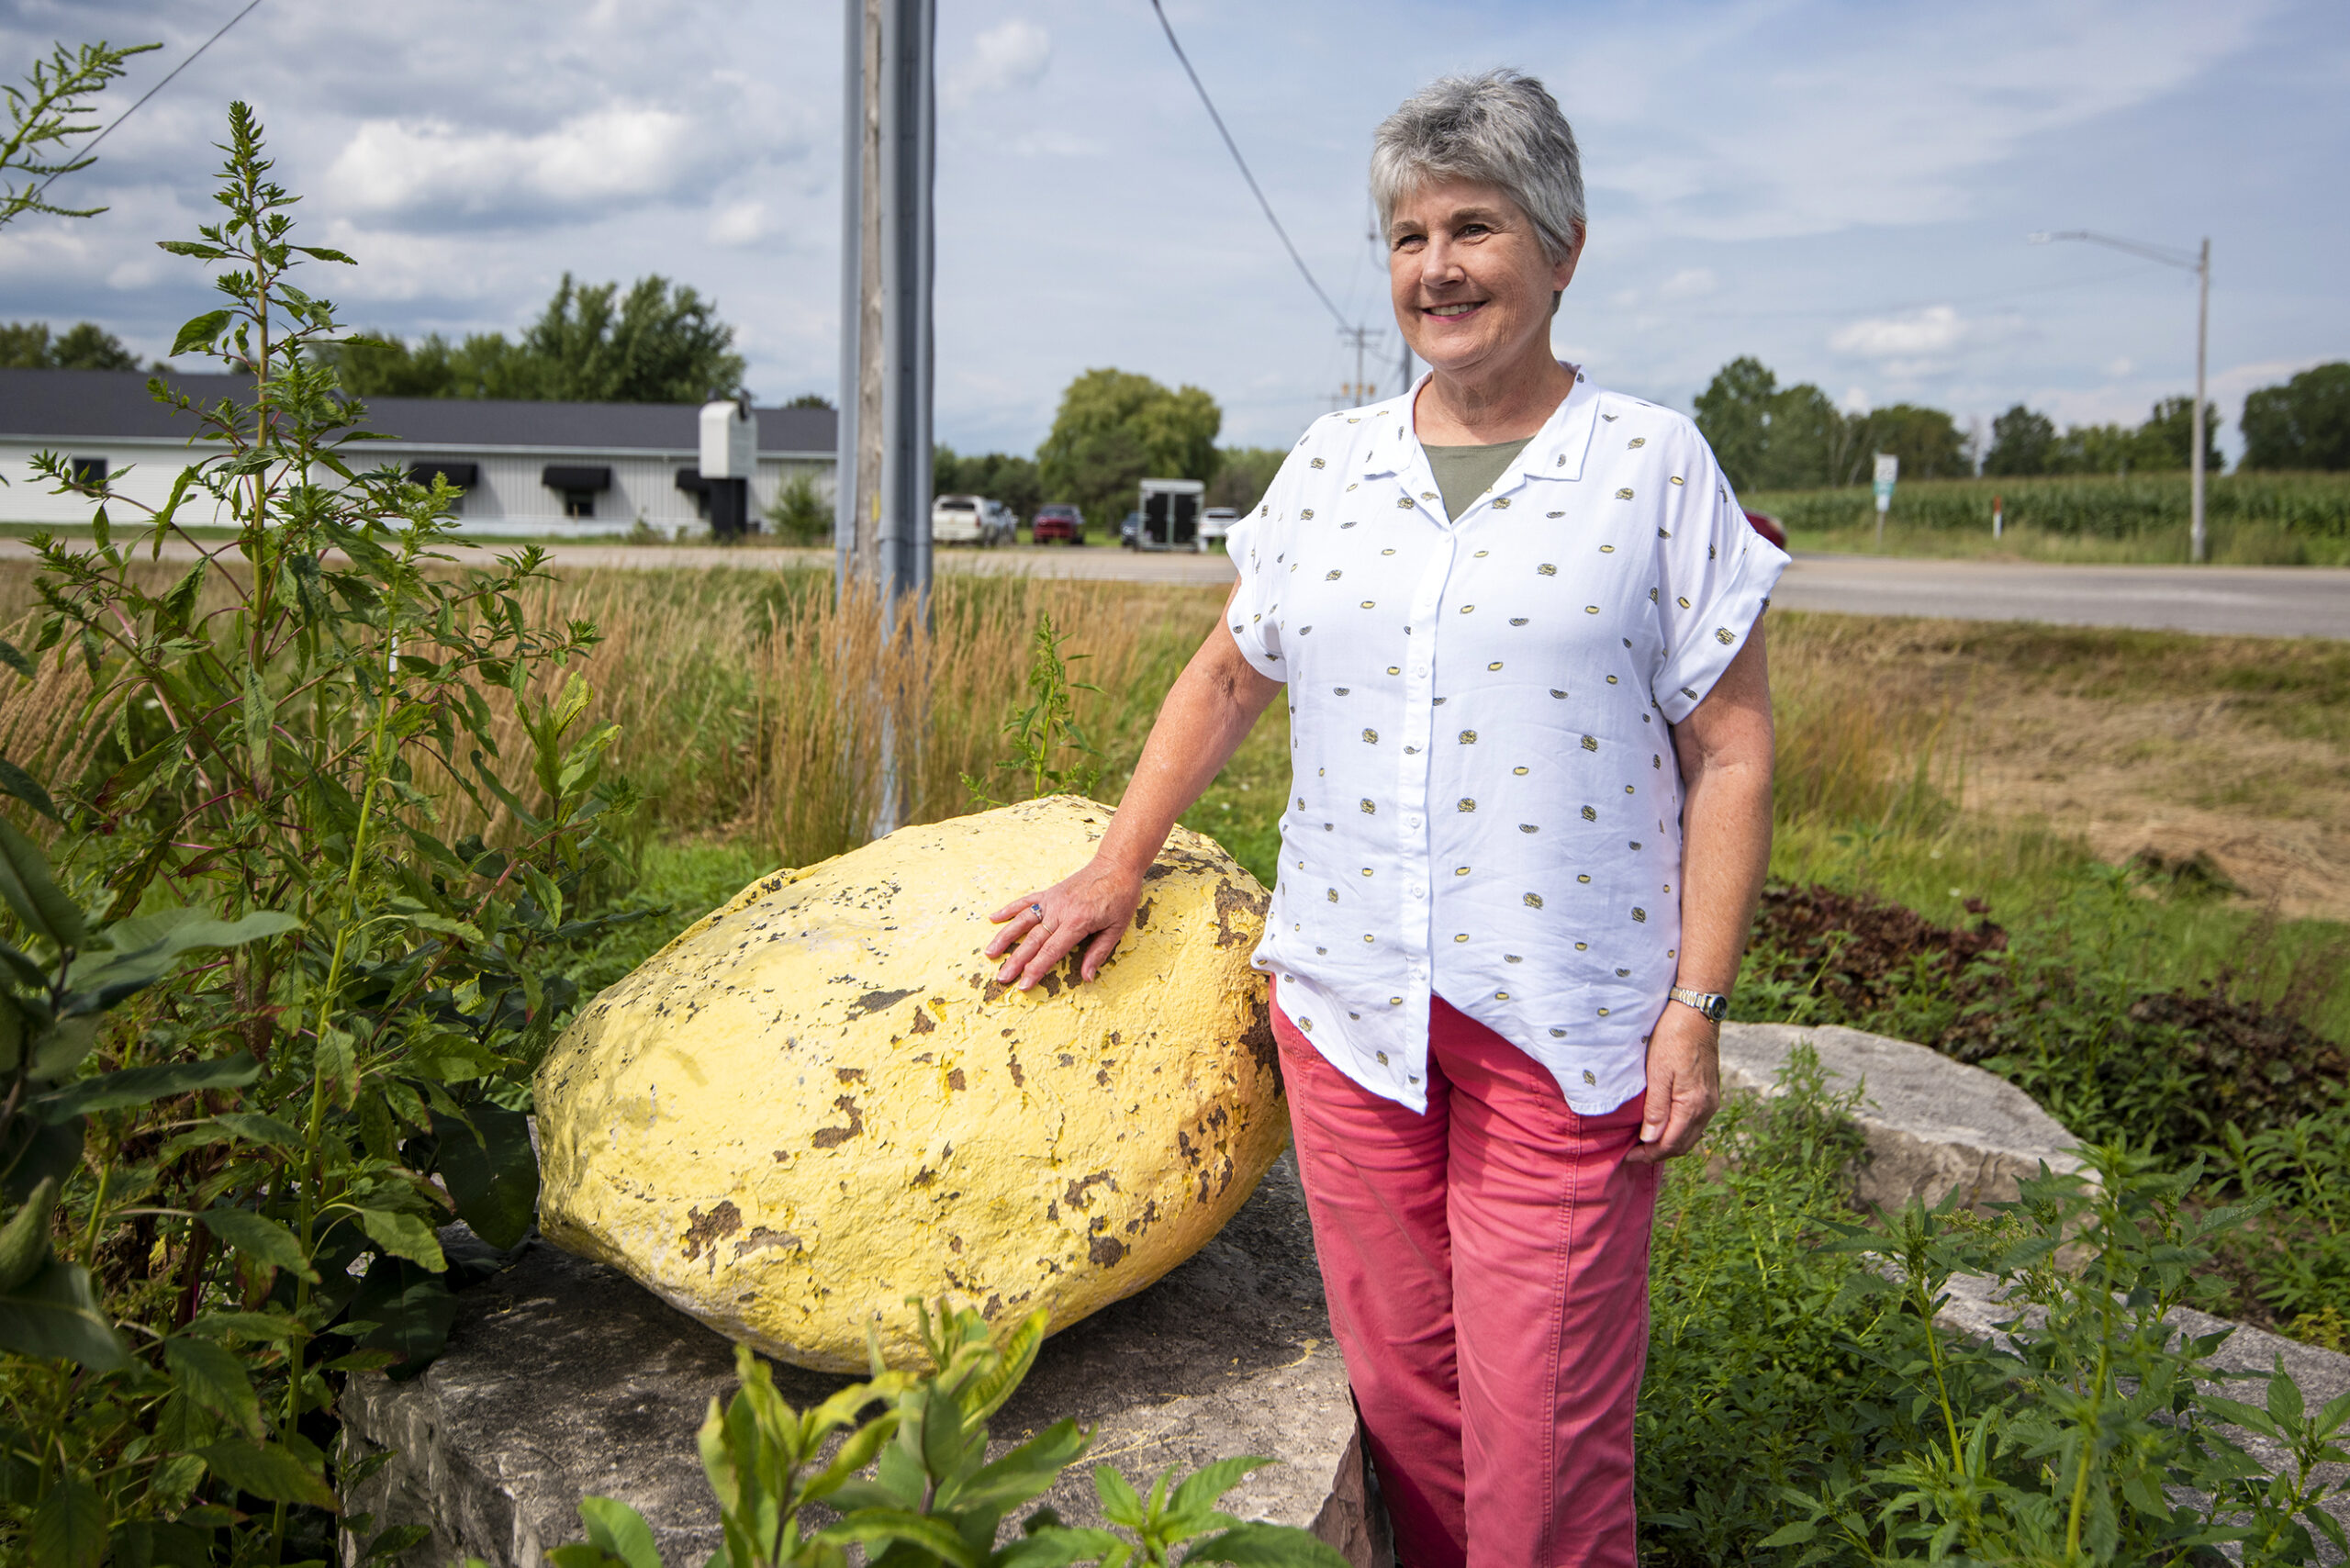 Beth English stands near a large boulder painted yellow.